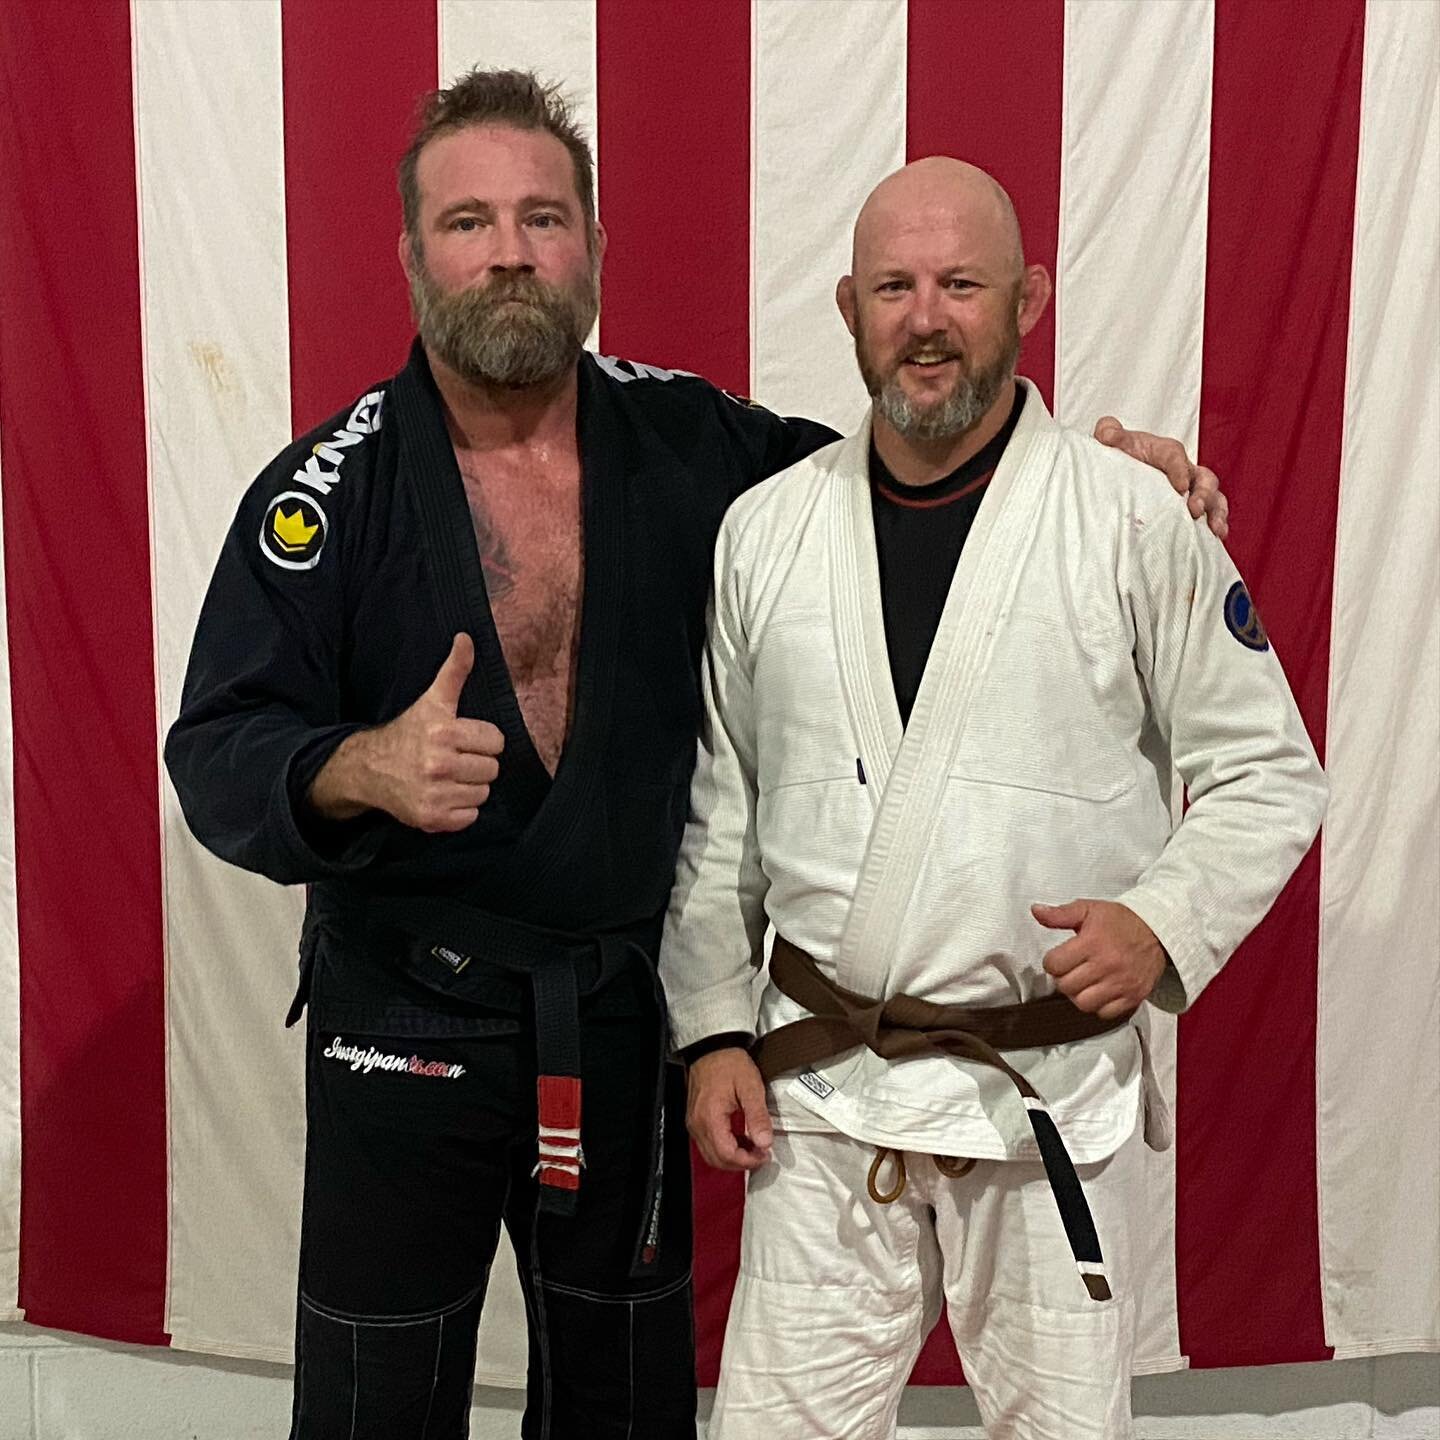 Congratulations to Shane for earning his brown belt.  It was a tough test with mostly purple and brown belts in attendance.  Great job and well deserved!